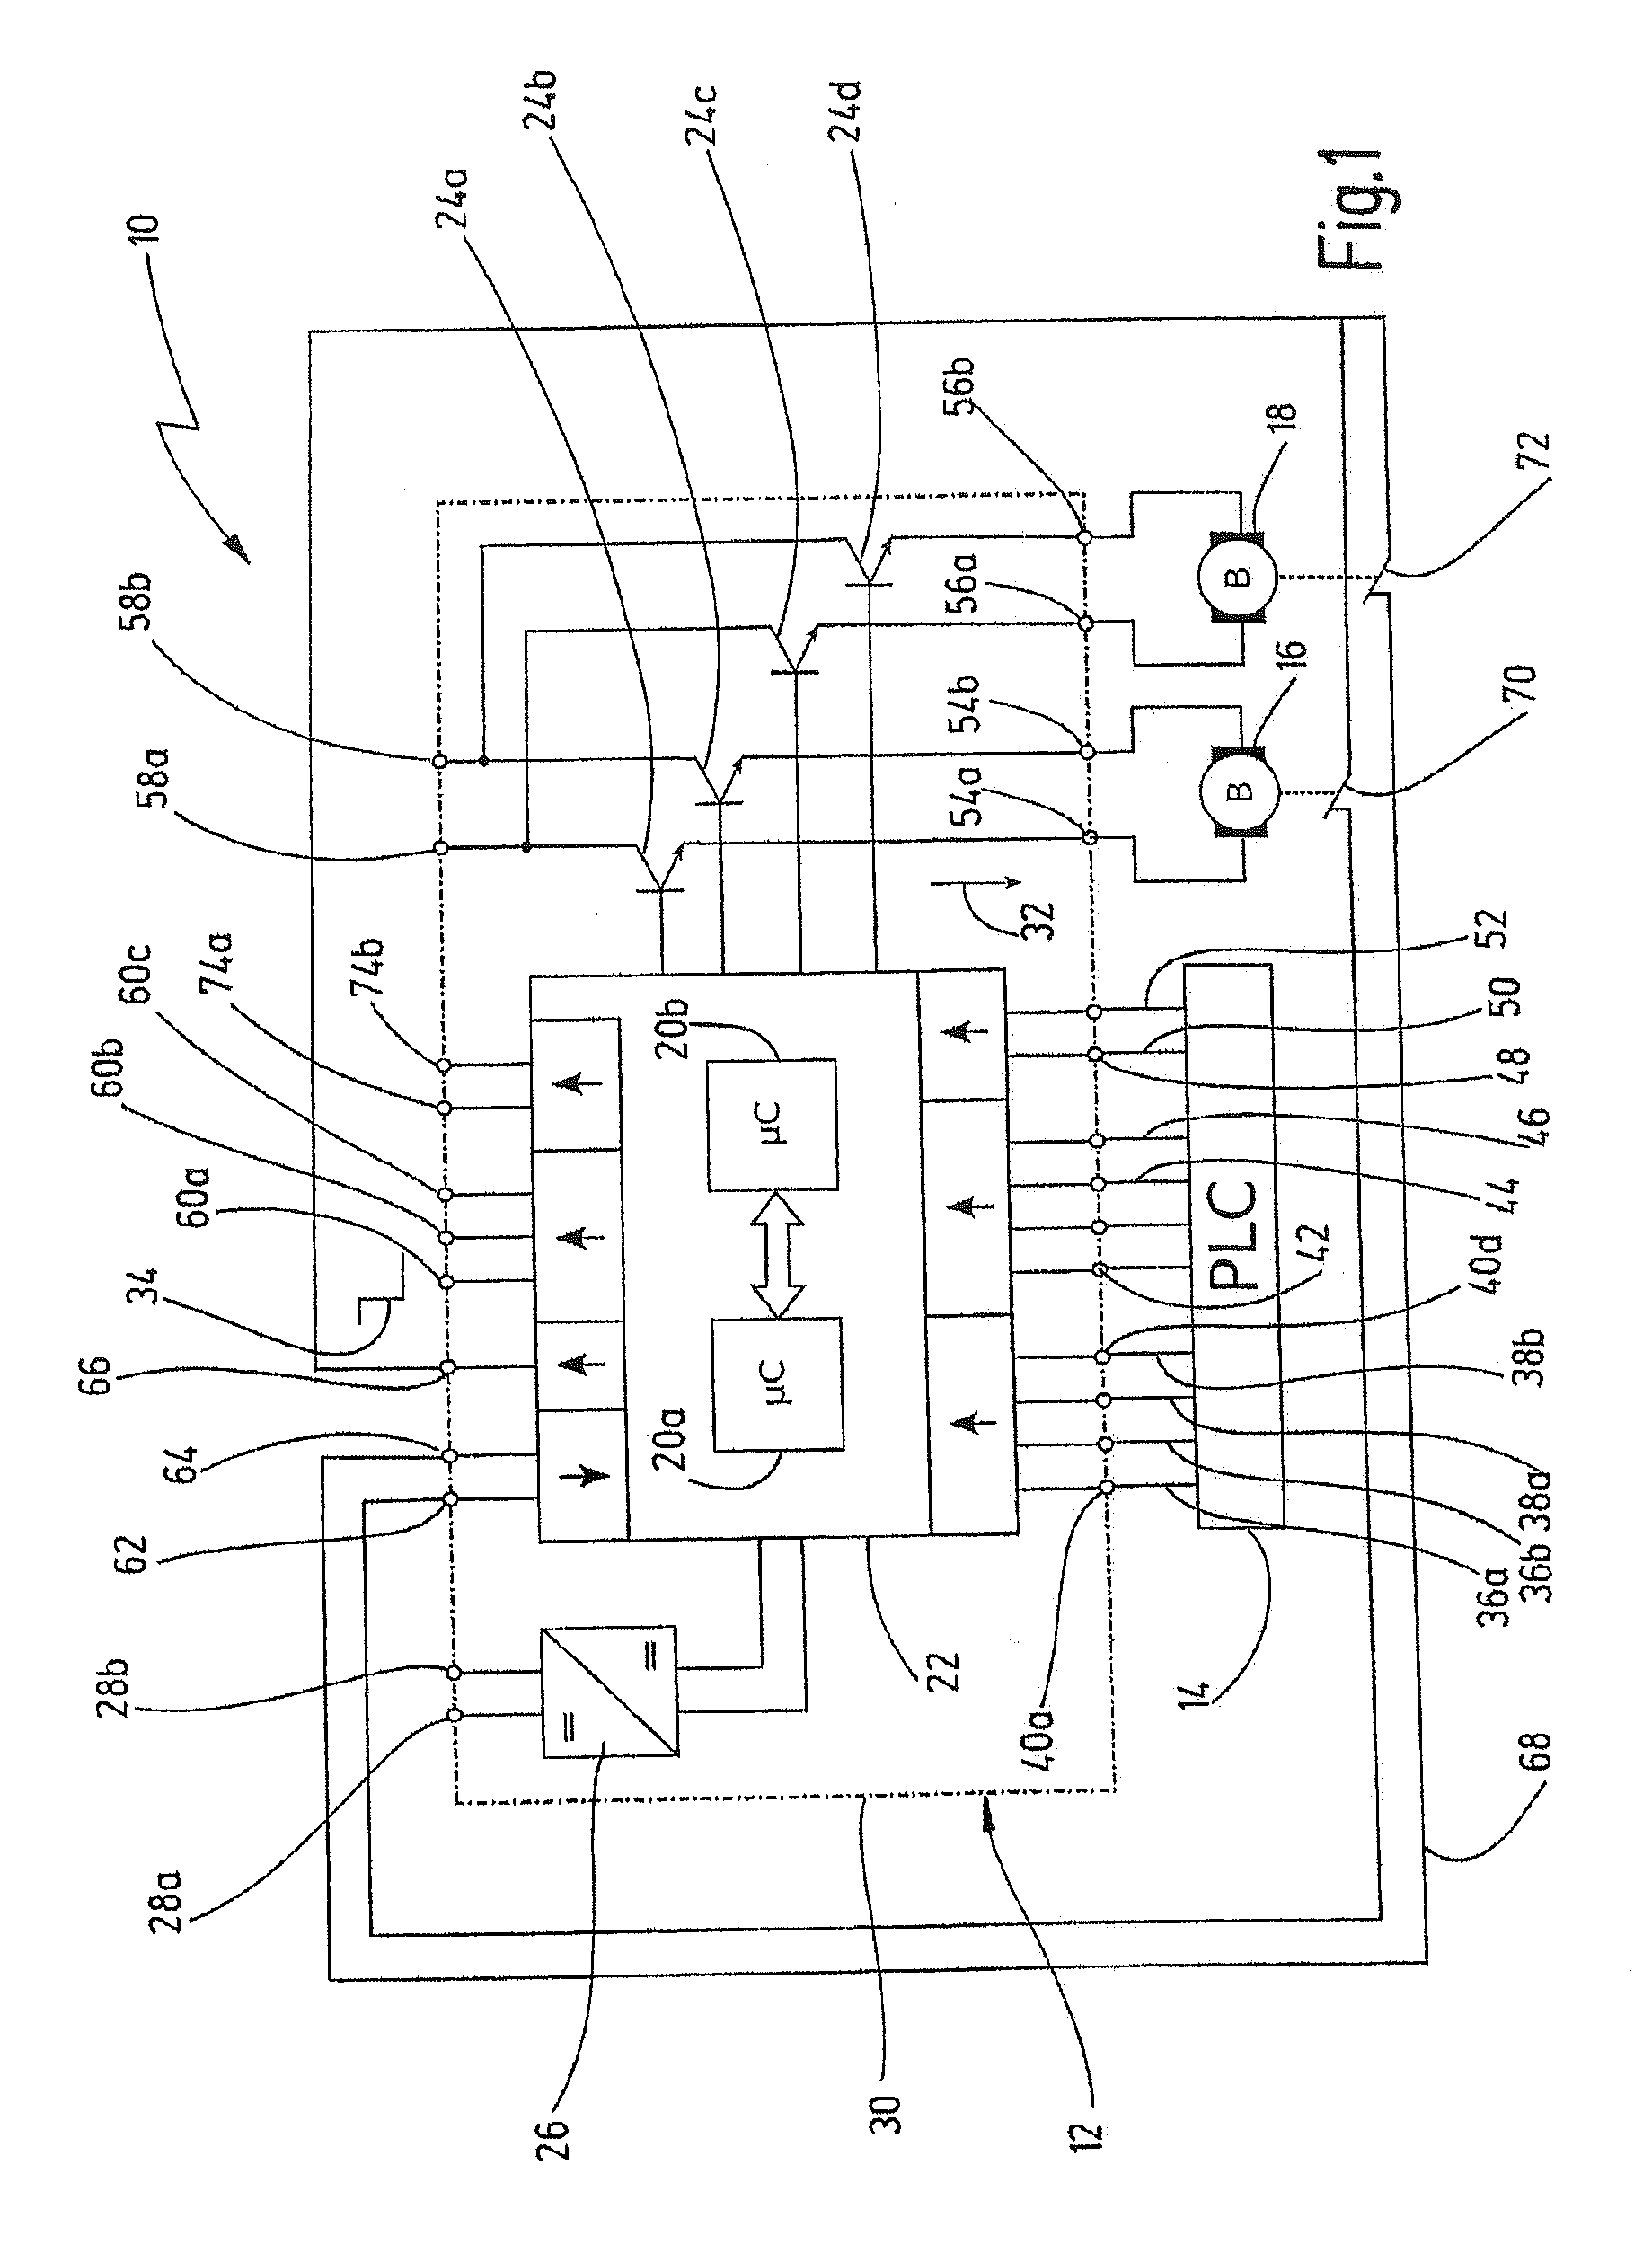 Compact control device for failsafely controlling an electrical actuator